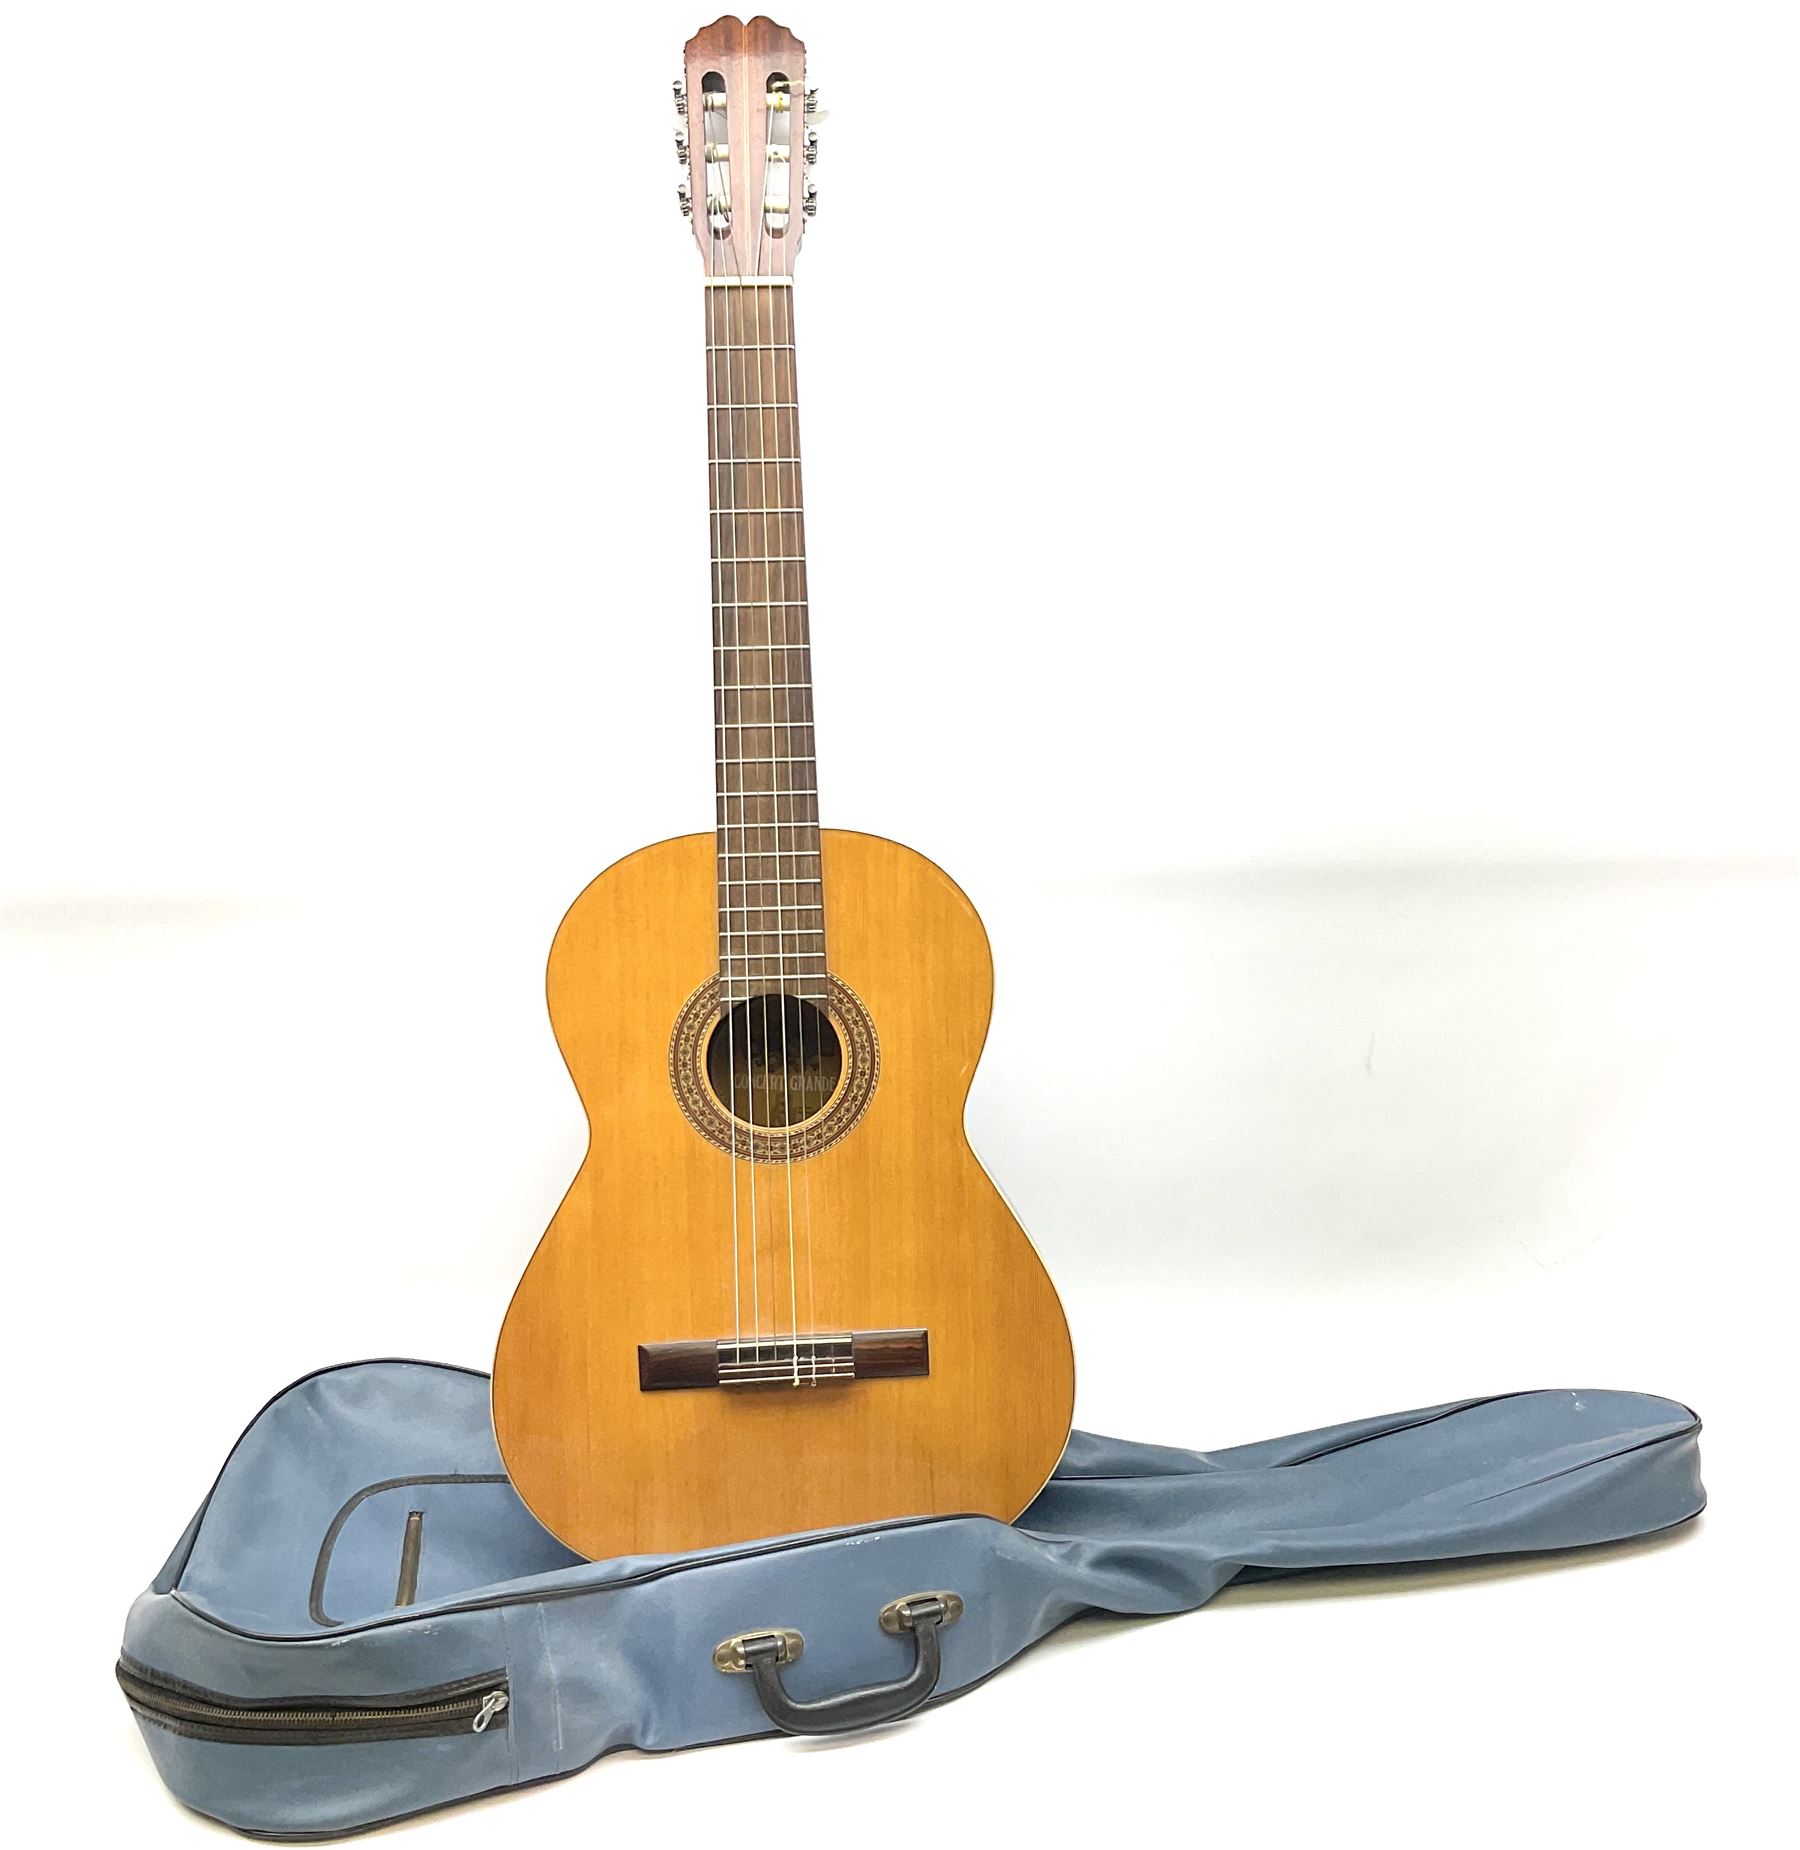 Spanish Concert Grande acoustic guitar with mahogany back and ribs and spruce top L100cm; in soft ca